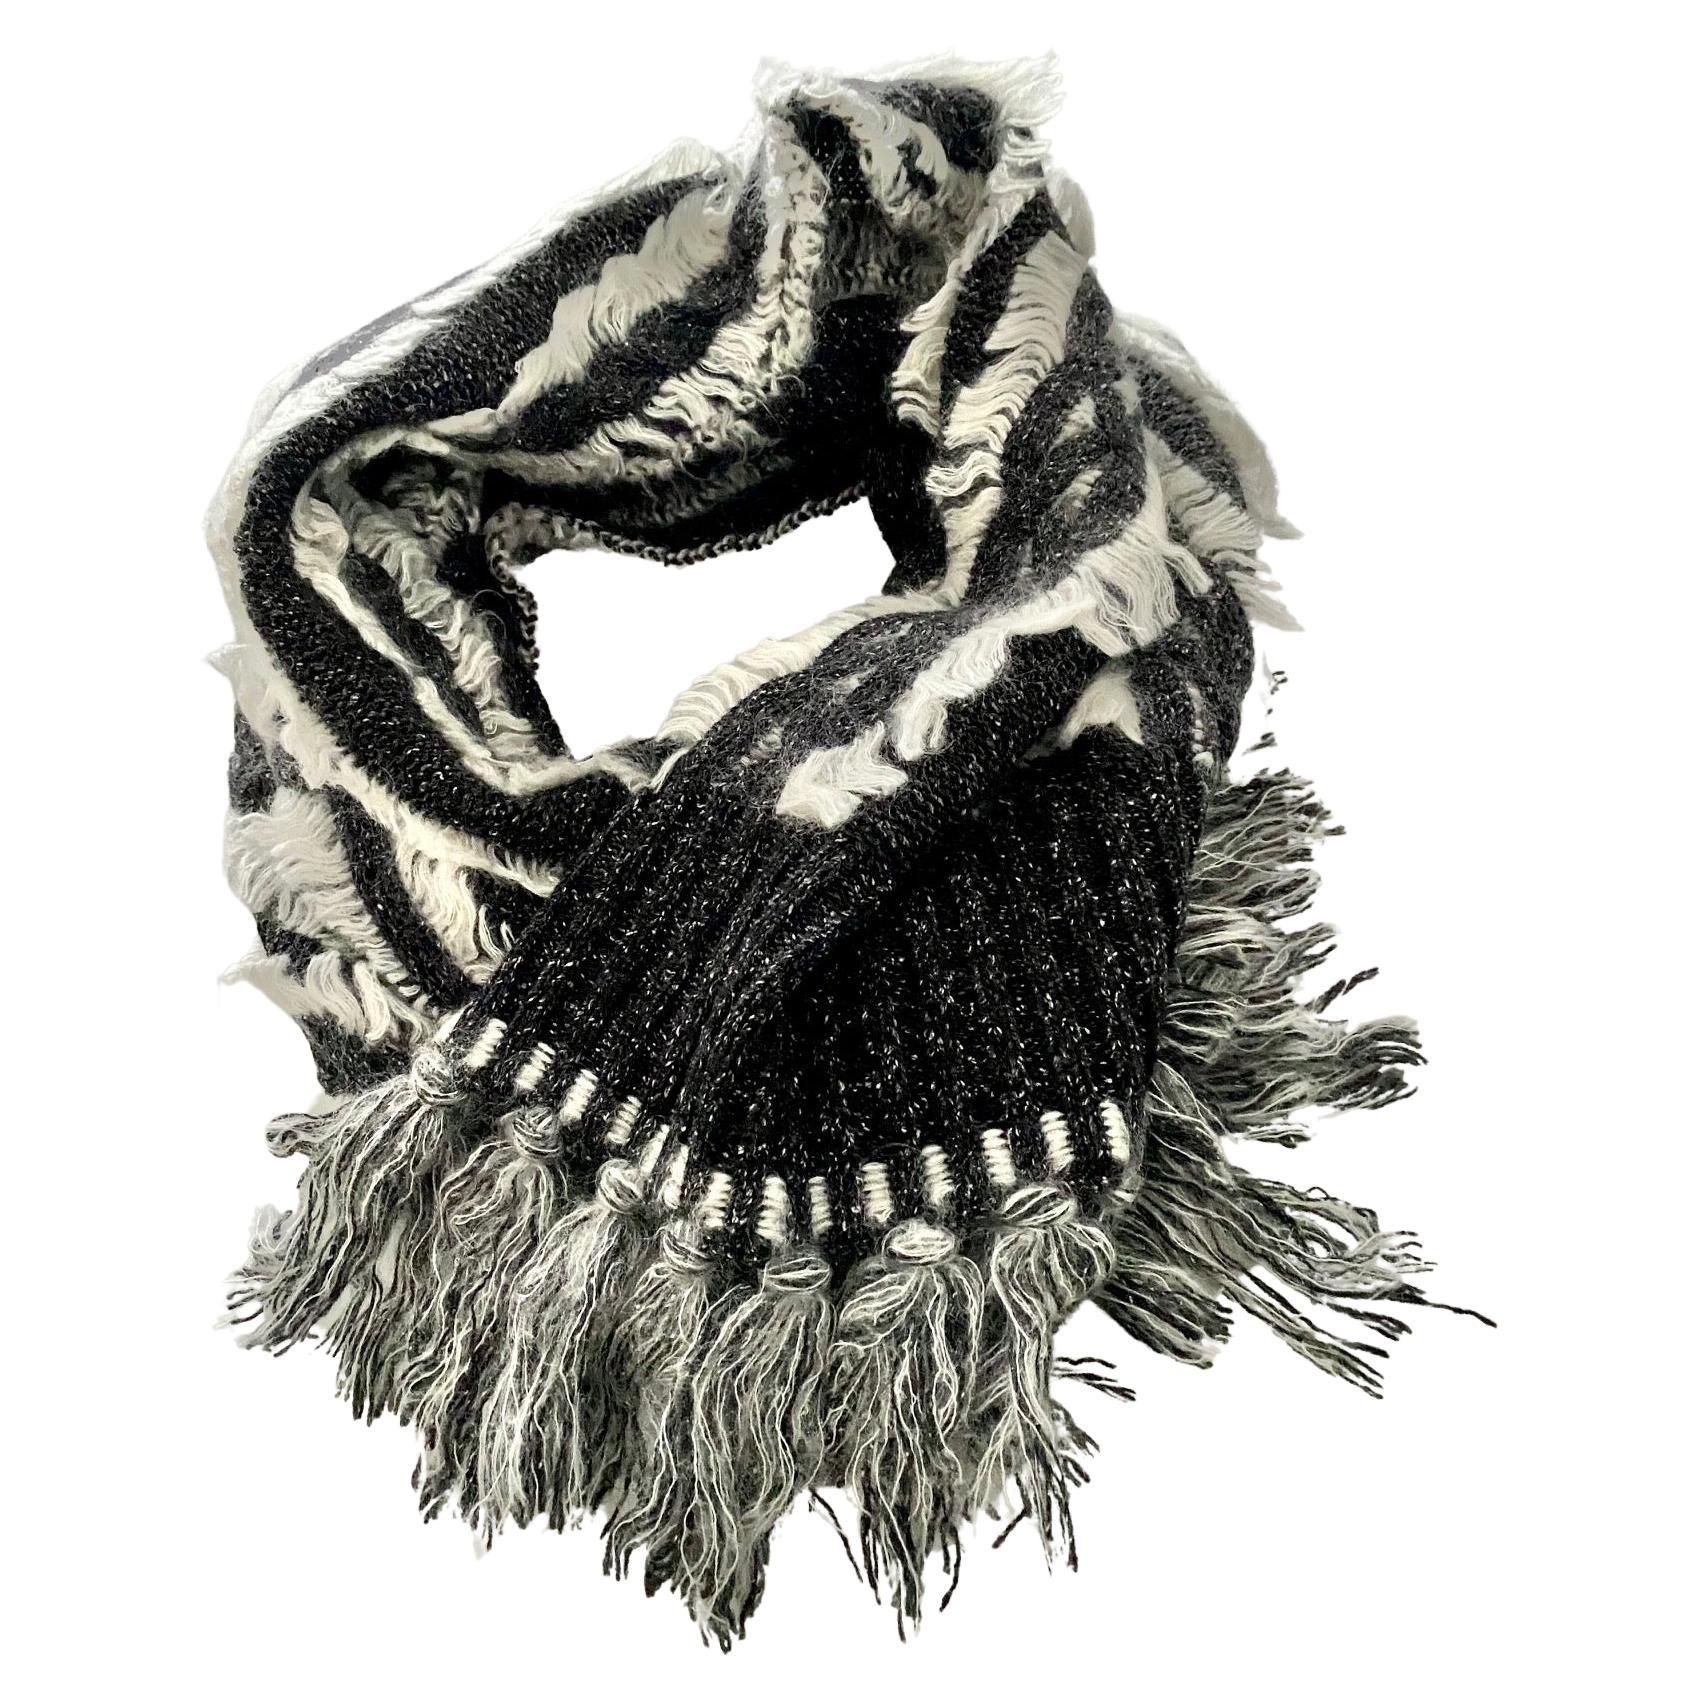 2000s Christian Dior Geometric Chunky Wool Knitted, Scarf Shawl, black and white wool, fringes, Made in Italy, this classic, timeless design is not only fashionable, but also crafted from luxurious wool to keep you warm and cozy in cooler weather